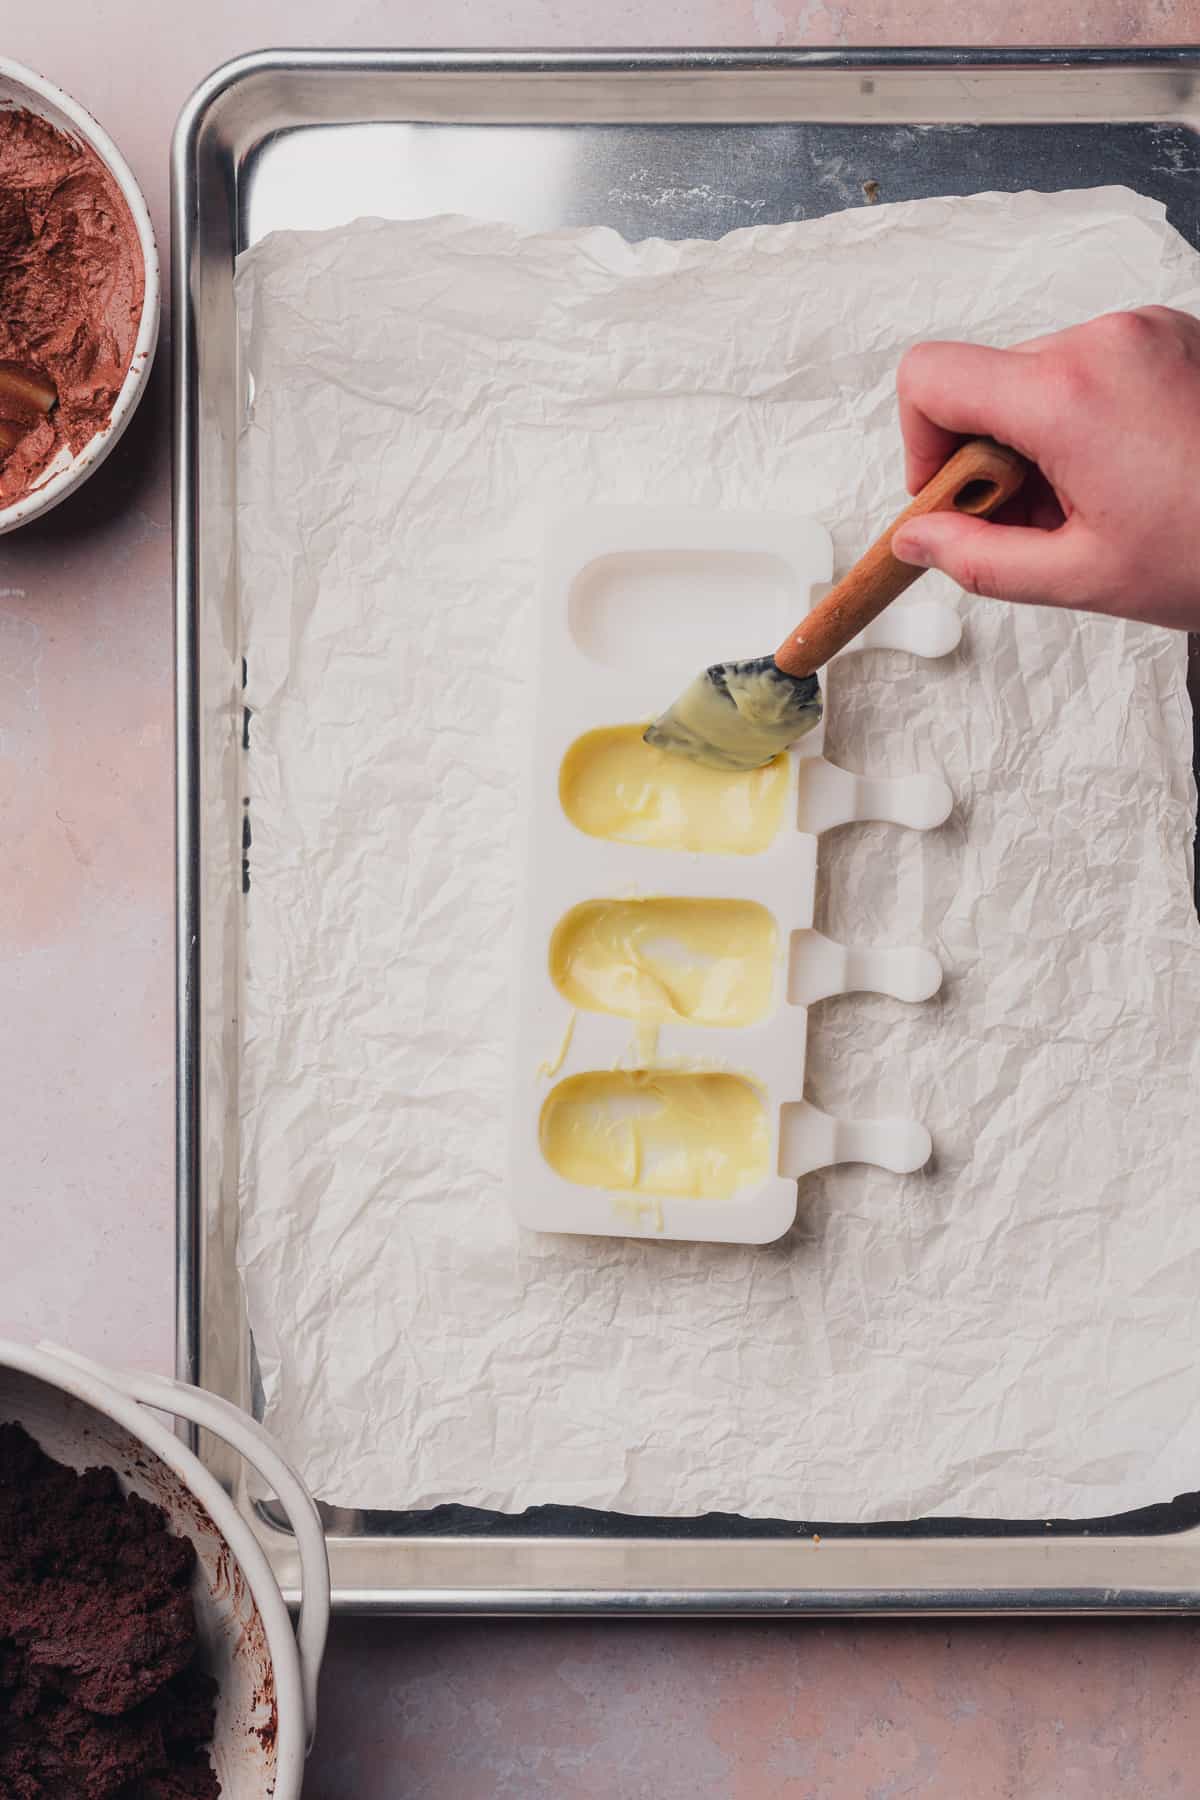 hand spreading white chocolate into a cakesicle mold with a rubber spatula